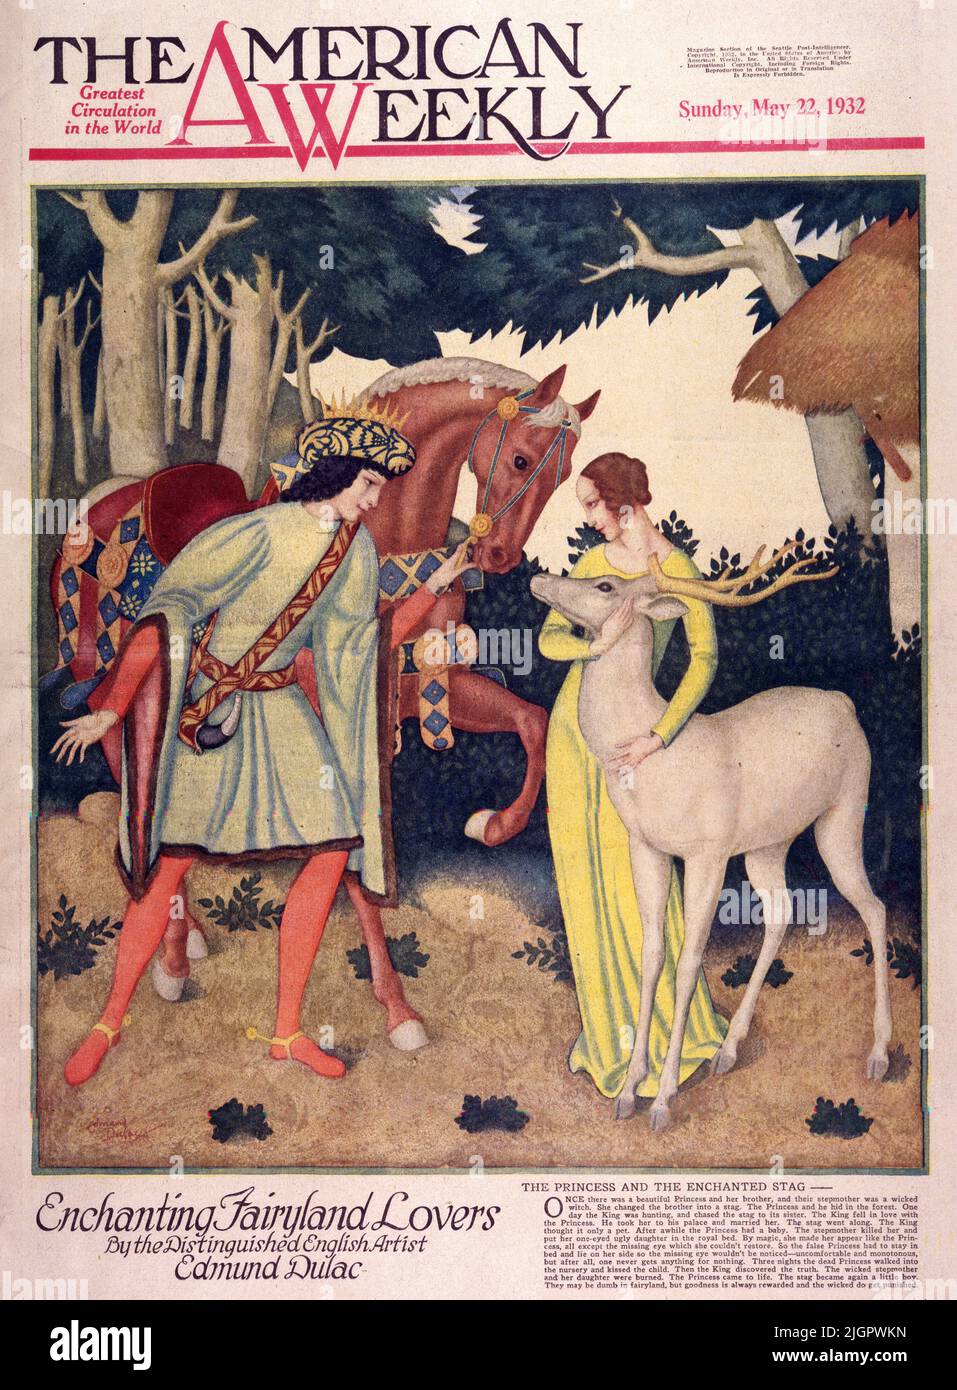 The Princess and the Enchanted Stag published on May 22,1932 in the American Weekly magazine painted by Edmund Dulac.Once there was a beautiful Princess and her brother, and their stepmother was a wicked witch. She changed the brother into a stag. The Princess and he hid in the forest. One day the King was hunting and chased the stag to its sister. The King fell in love with the Princess. He took her to his palace and married her. The stag went along. The King thought it only a pet. After a while the Princess had a baby. The stepmother killed her and put her one-eyed daughter in the royal bed. Stock Photo